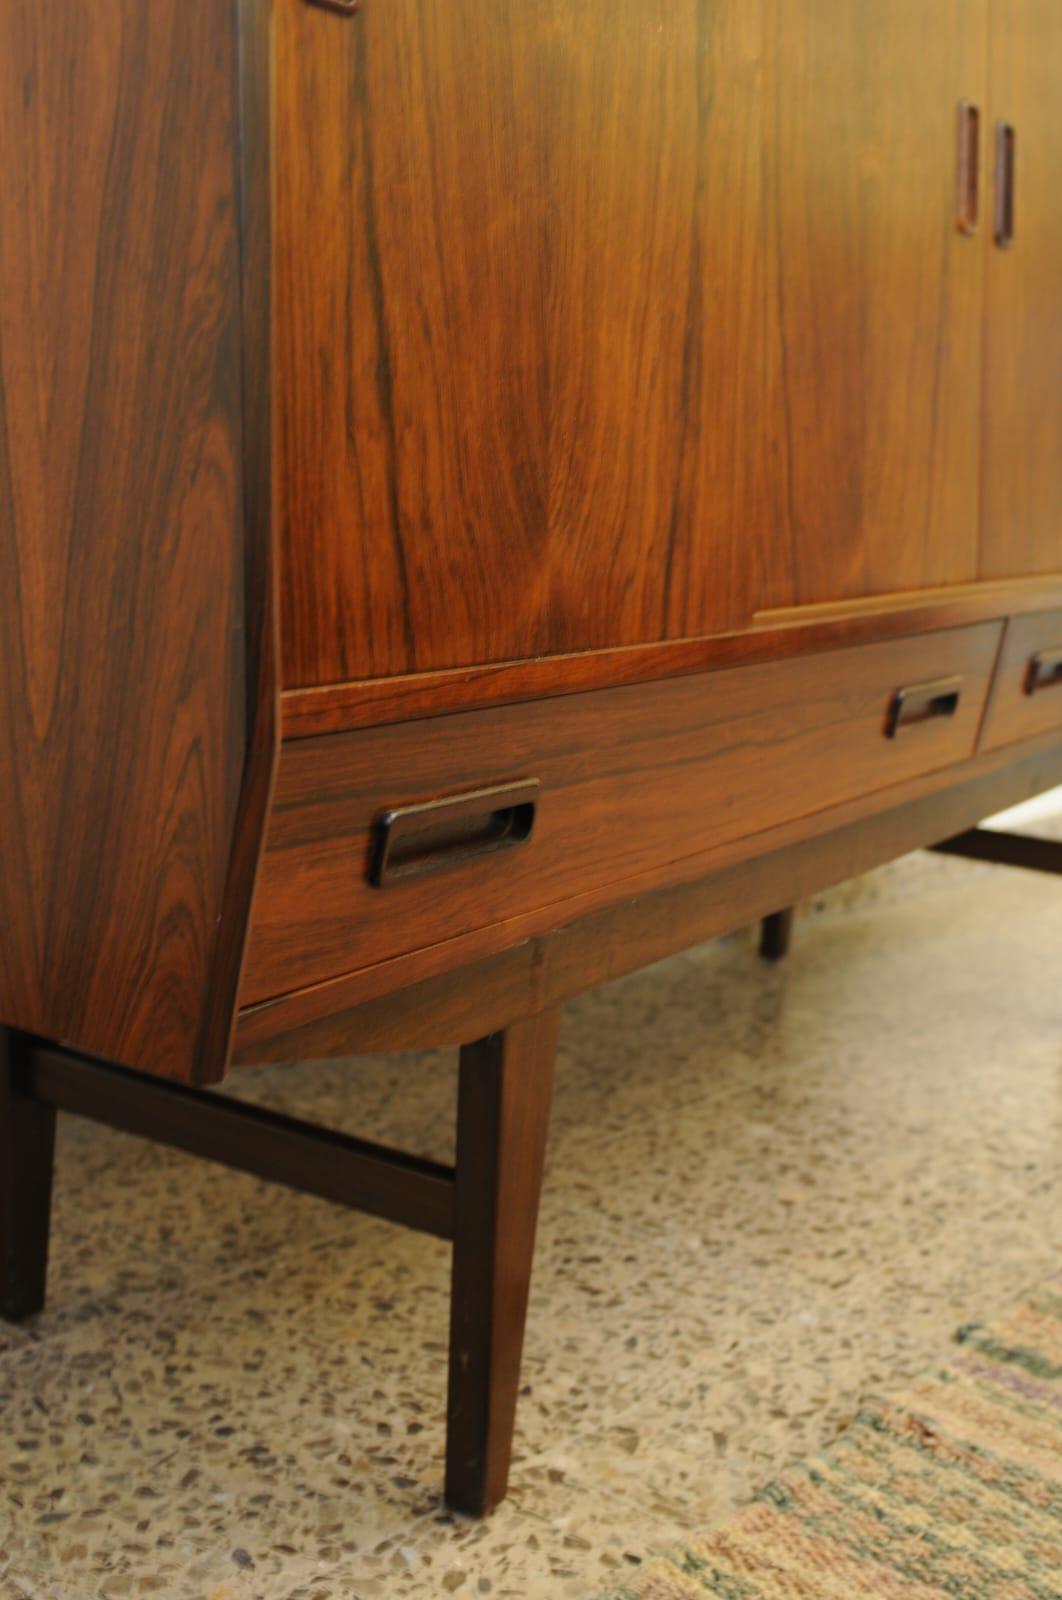 Rosewood sideboard designed by Borge Seindal in Denmark in the 1960s., gorgeous wood graining details and handles very unique of the era, In good condition throughout

This sideboard is an iconic example of Danish mid-century furniture in both